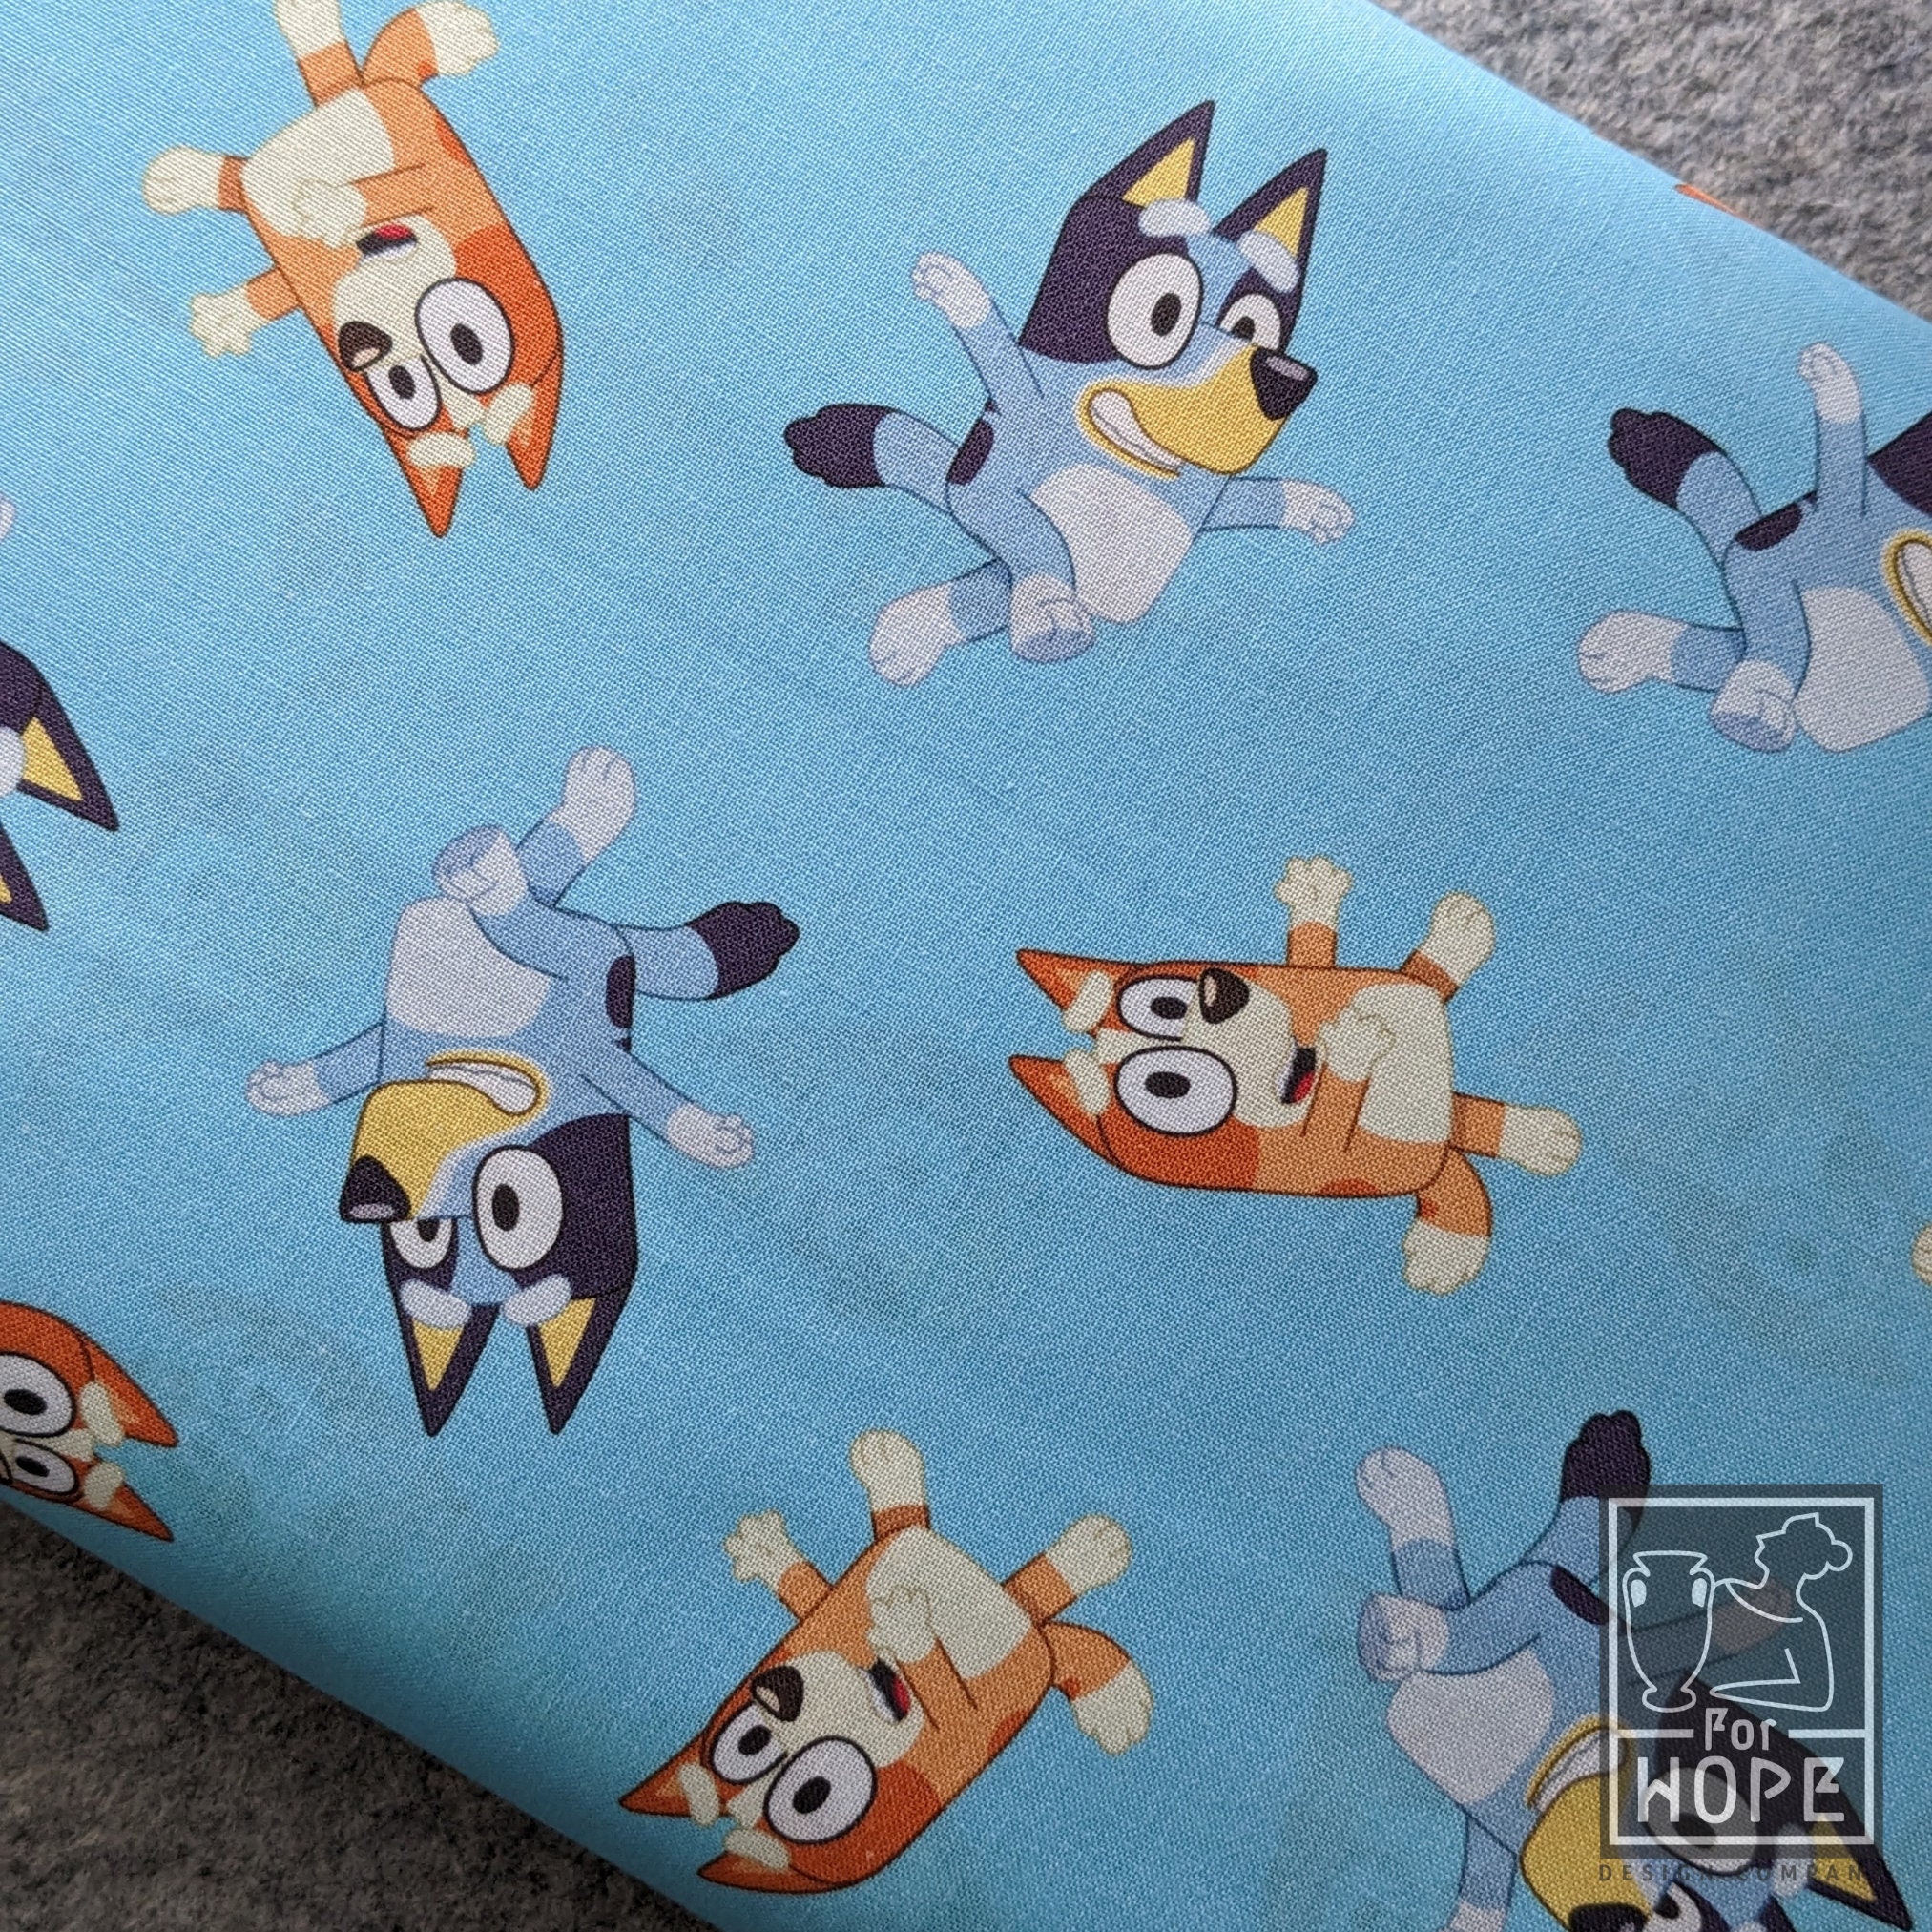 Bluey Family Fabric by the Yard, Springs Creative, Kids Fabric, Licensed  Fabric, 100% Quilting Cotton, Fat Quarters 